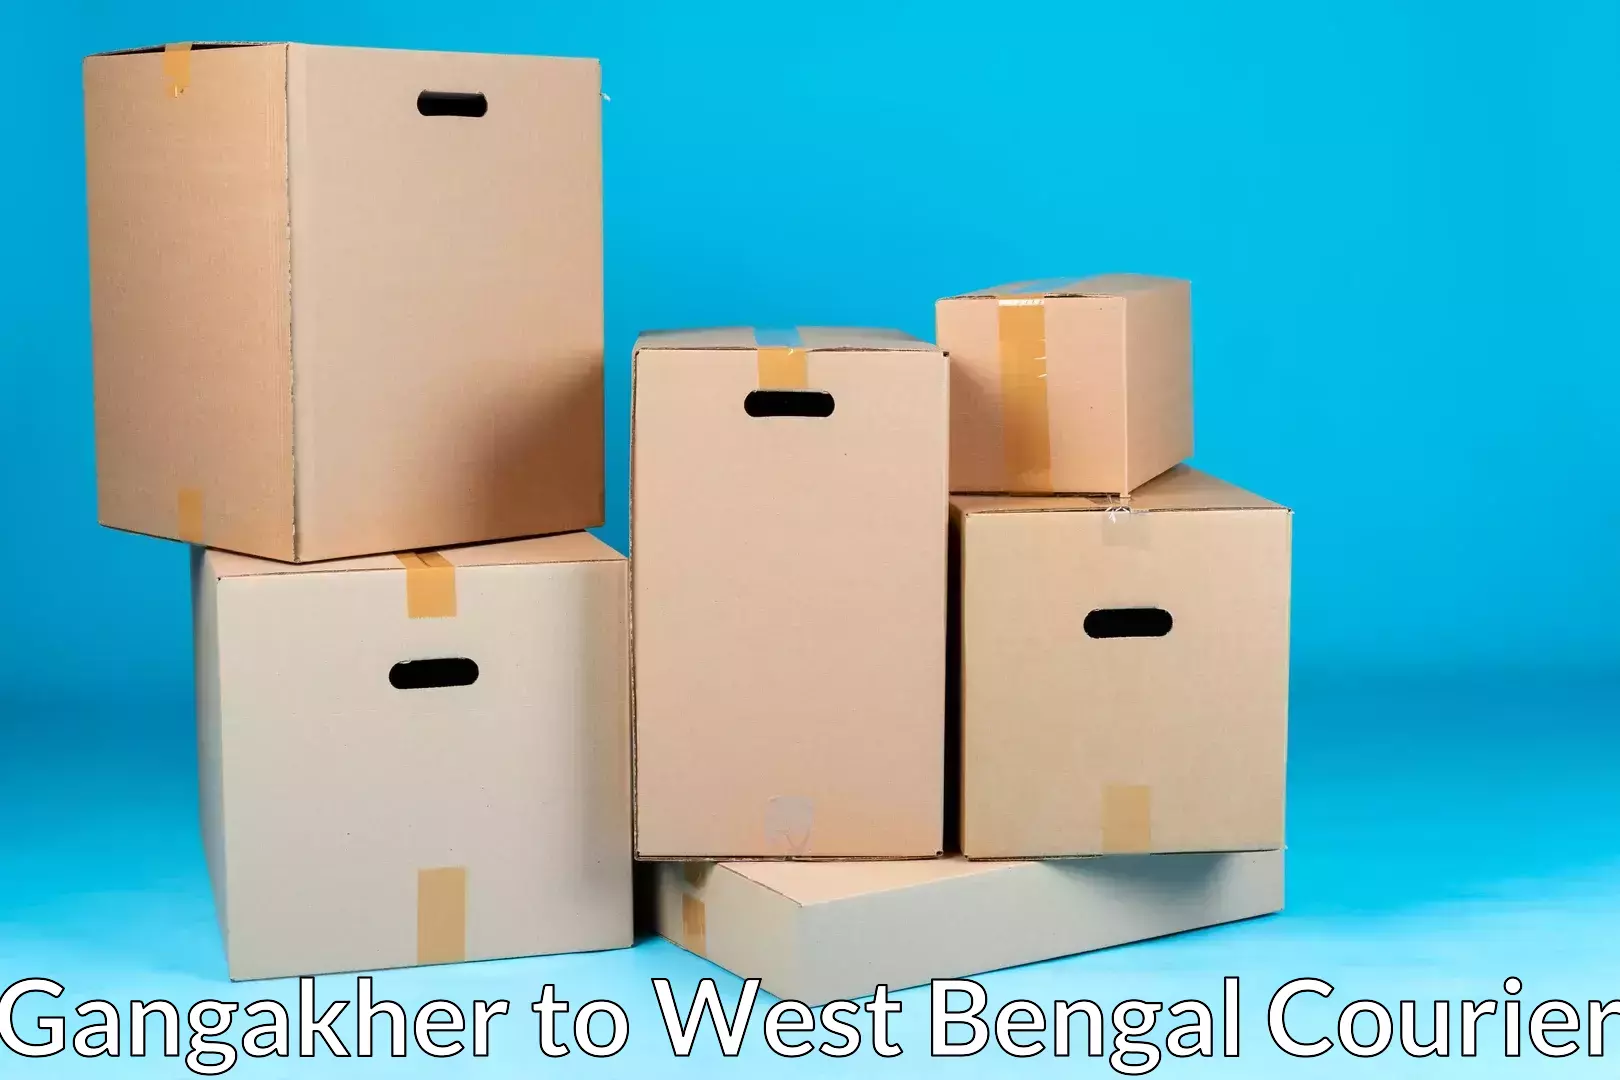 Moving and packing experts Gangakher to Hooghly